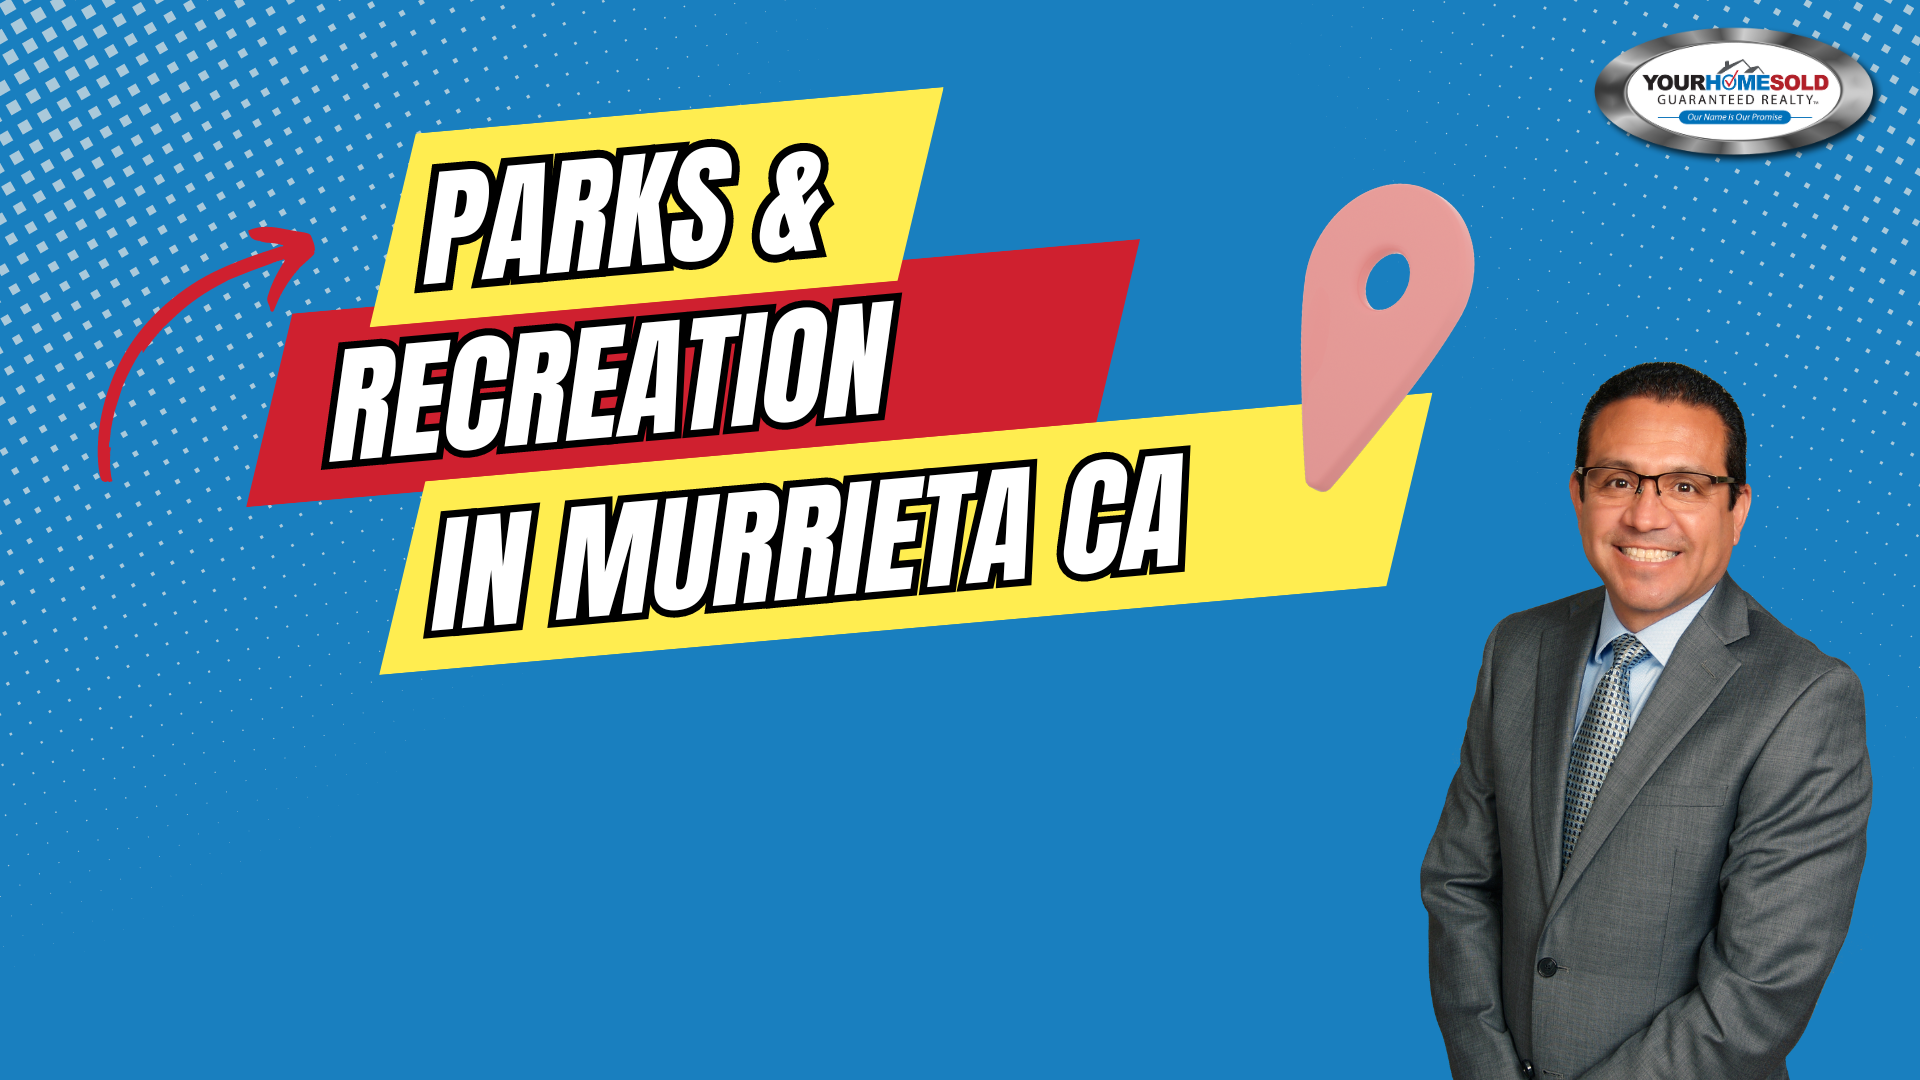 Parks and Recreation in Murrieta Ca